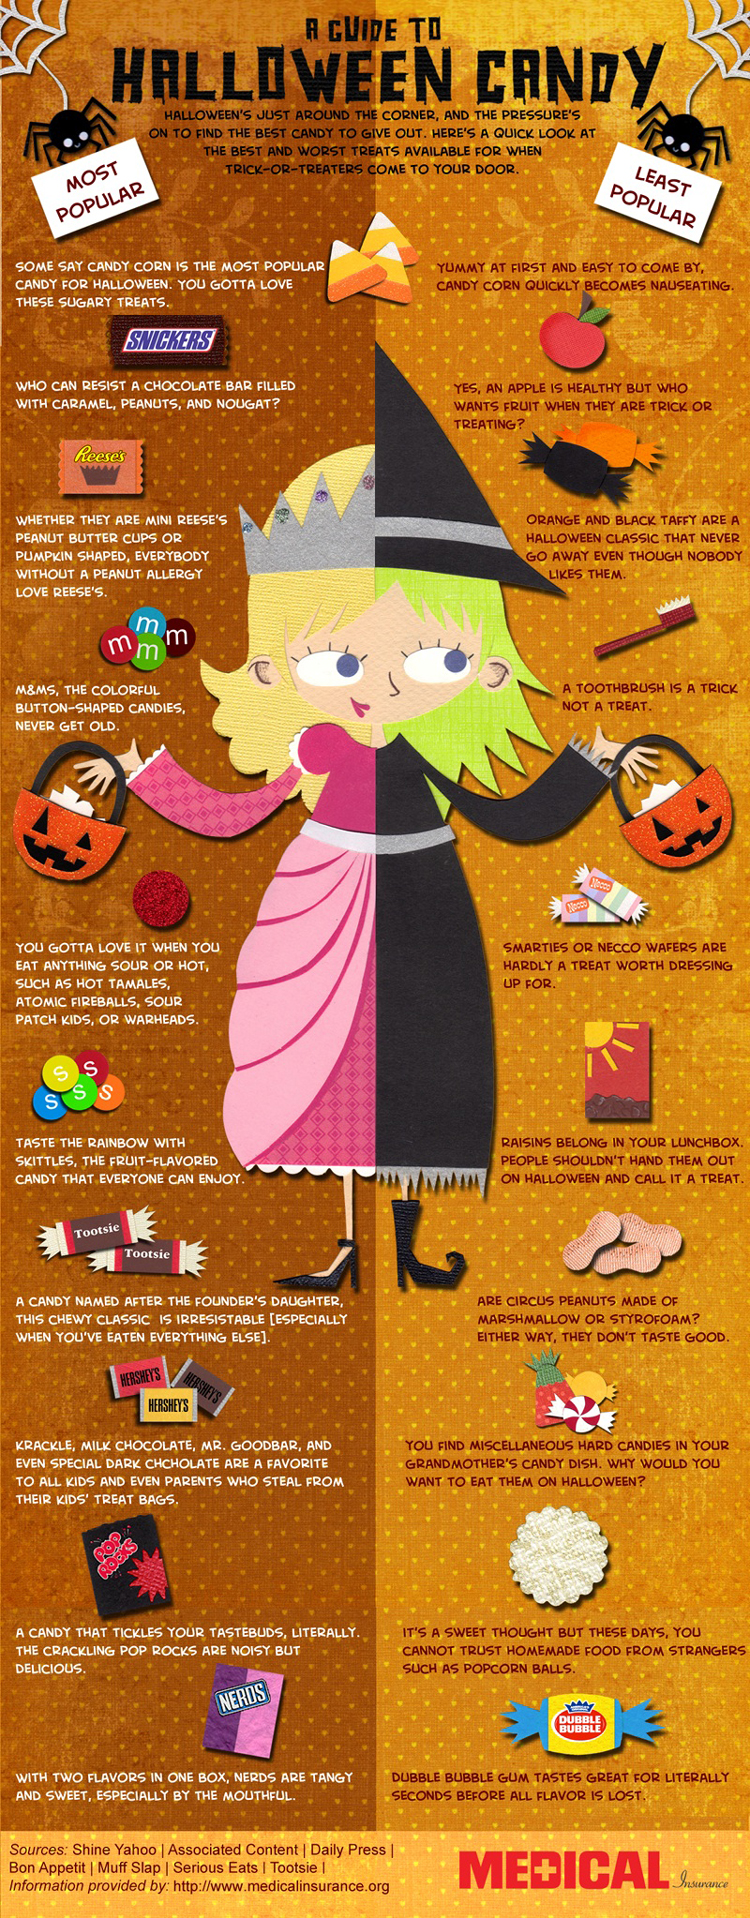 popular-halloween-candy-to-buy